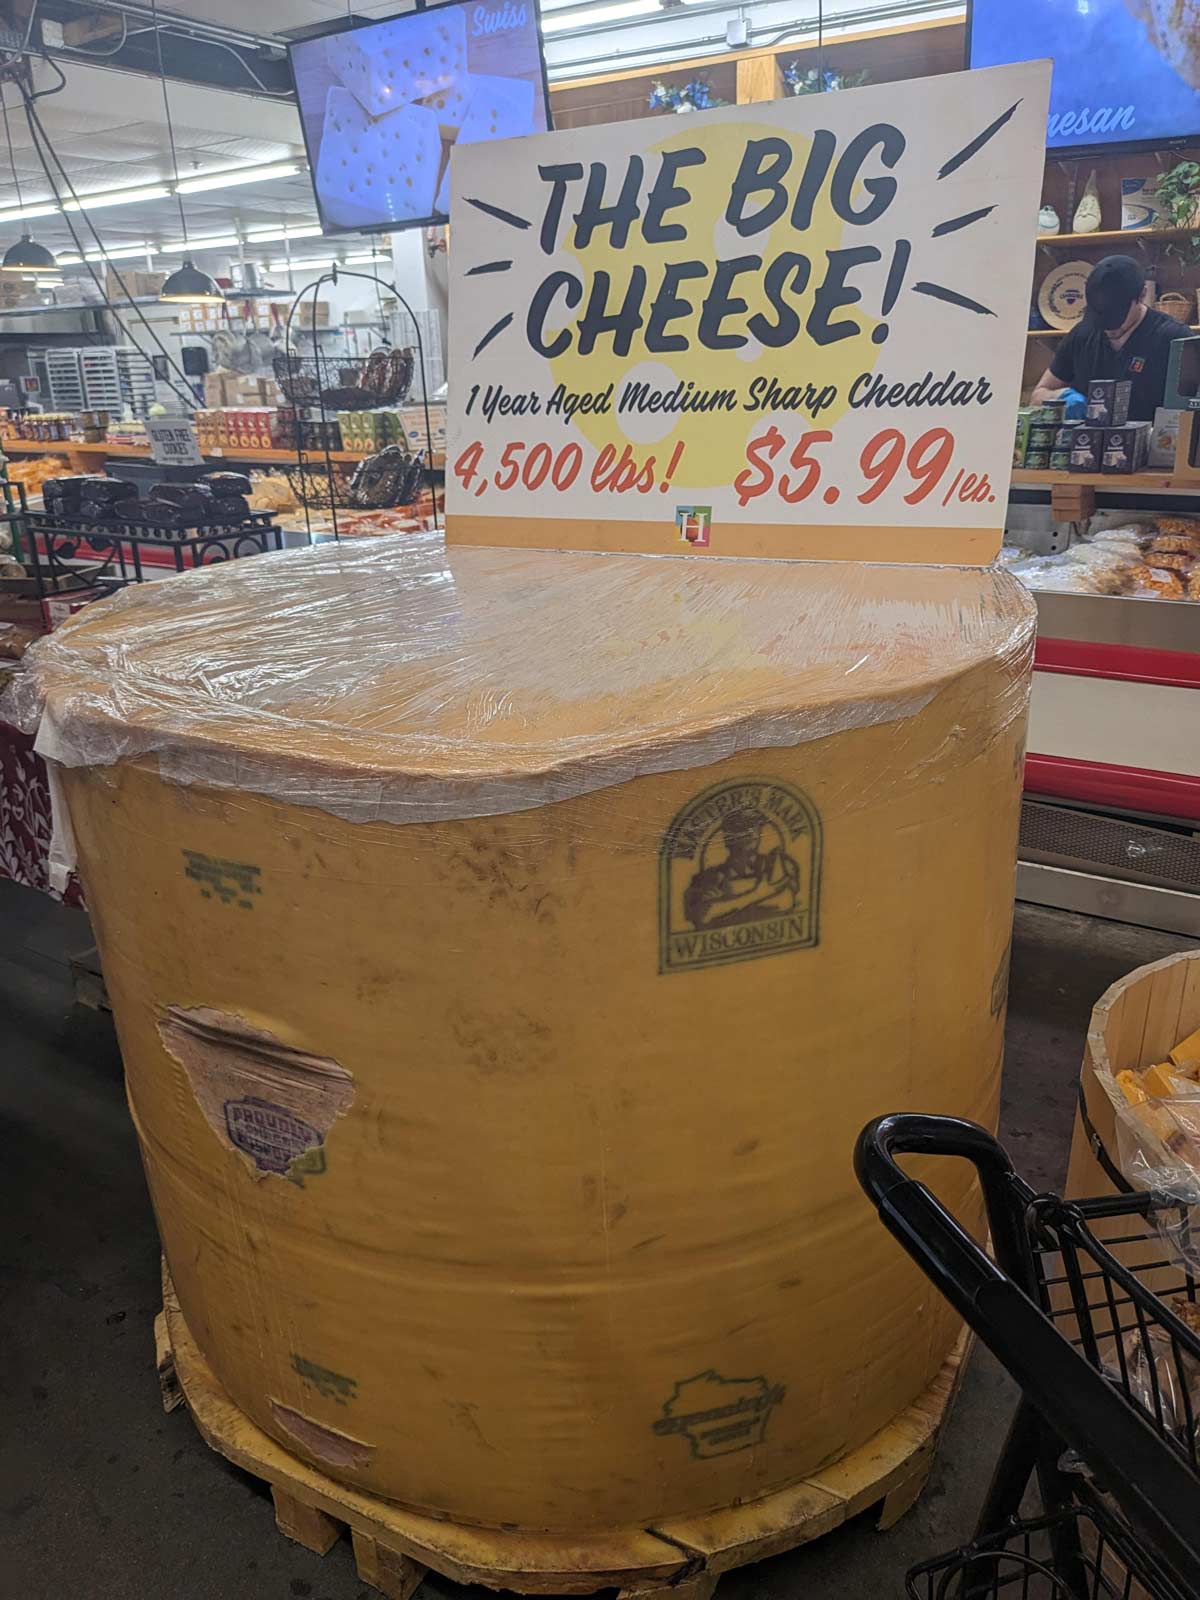 This 4,500 pound wheel of cheese at my local grocer